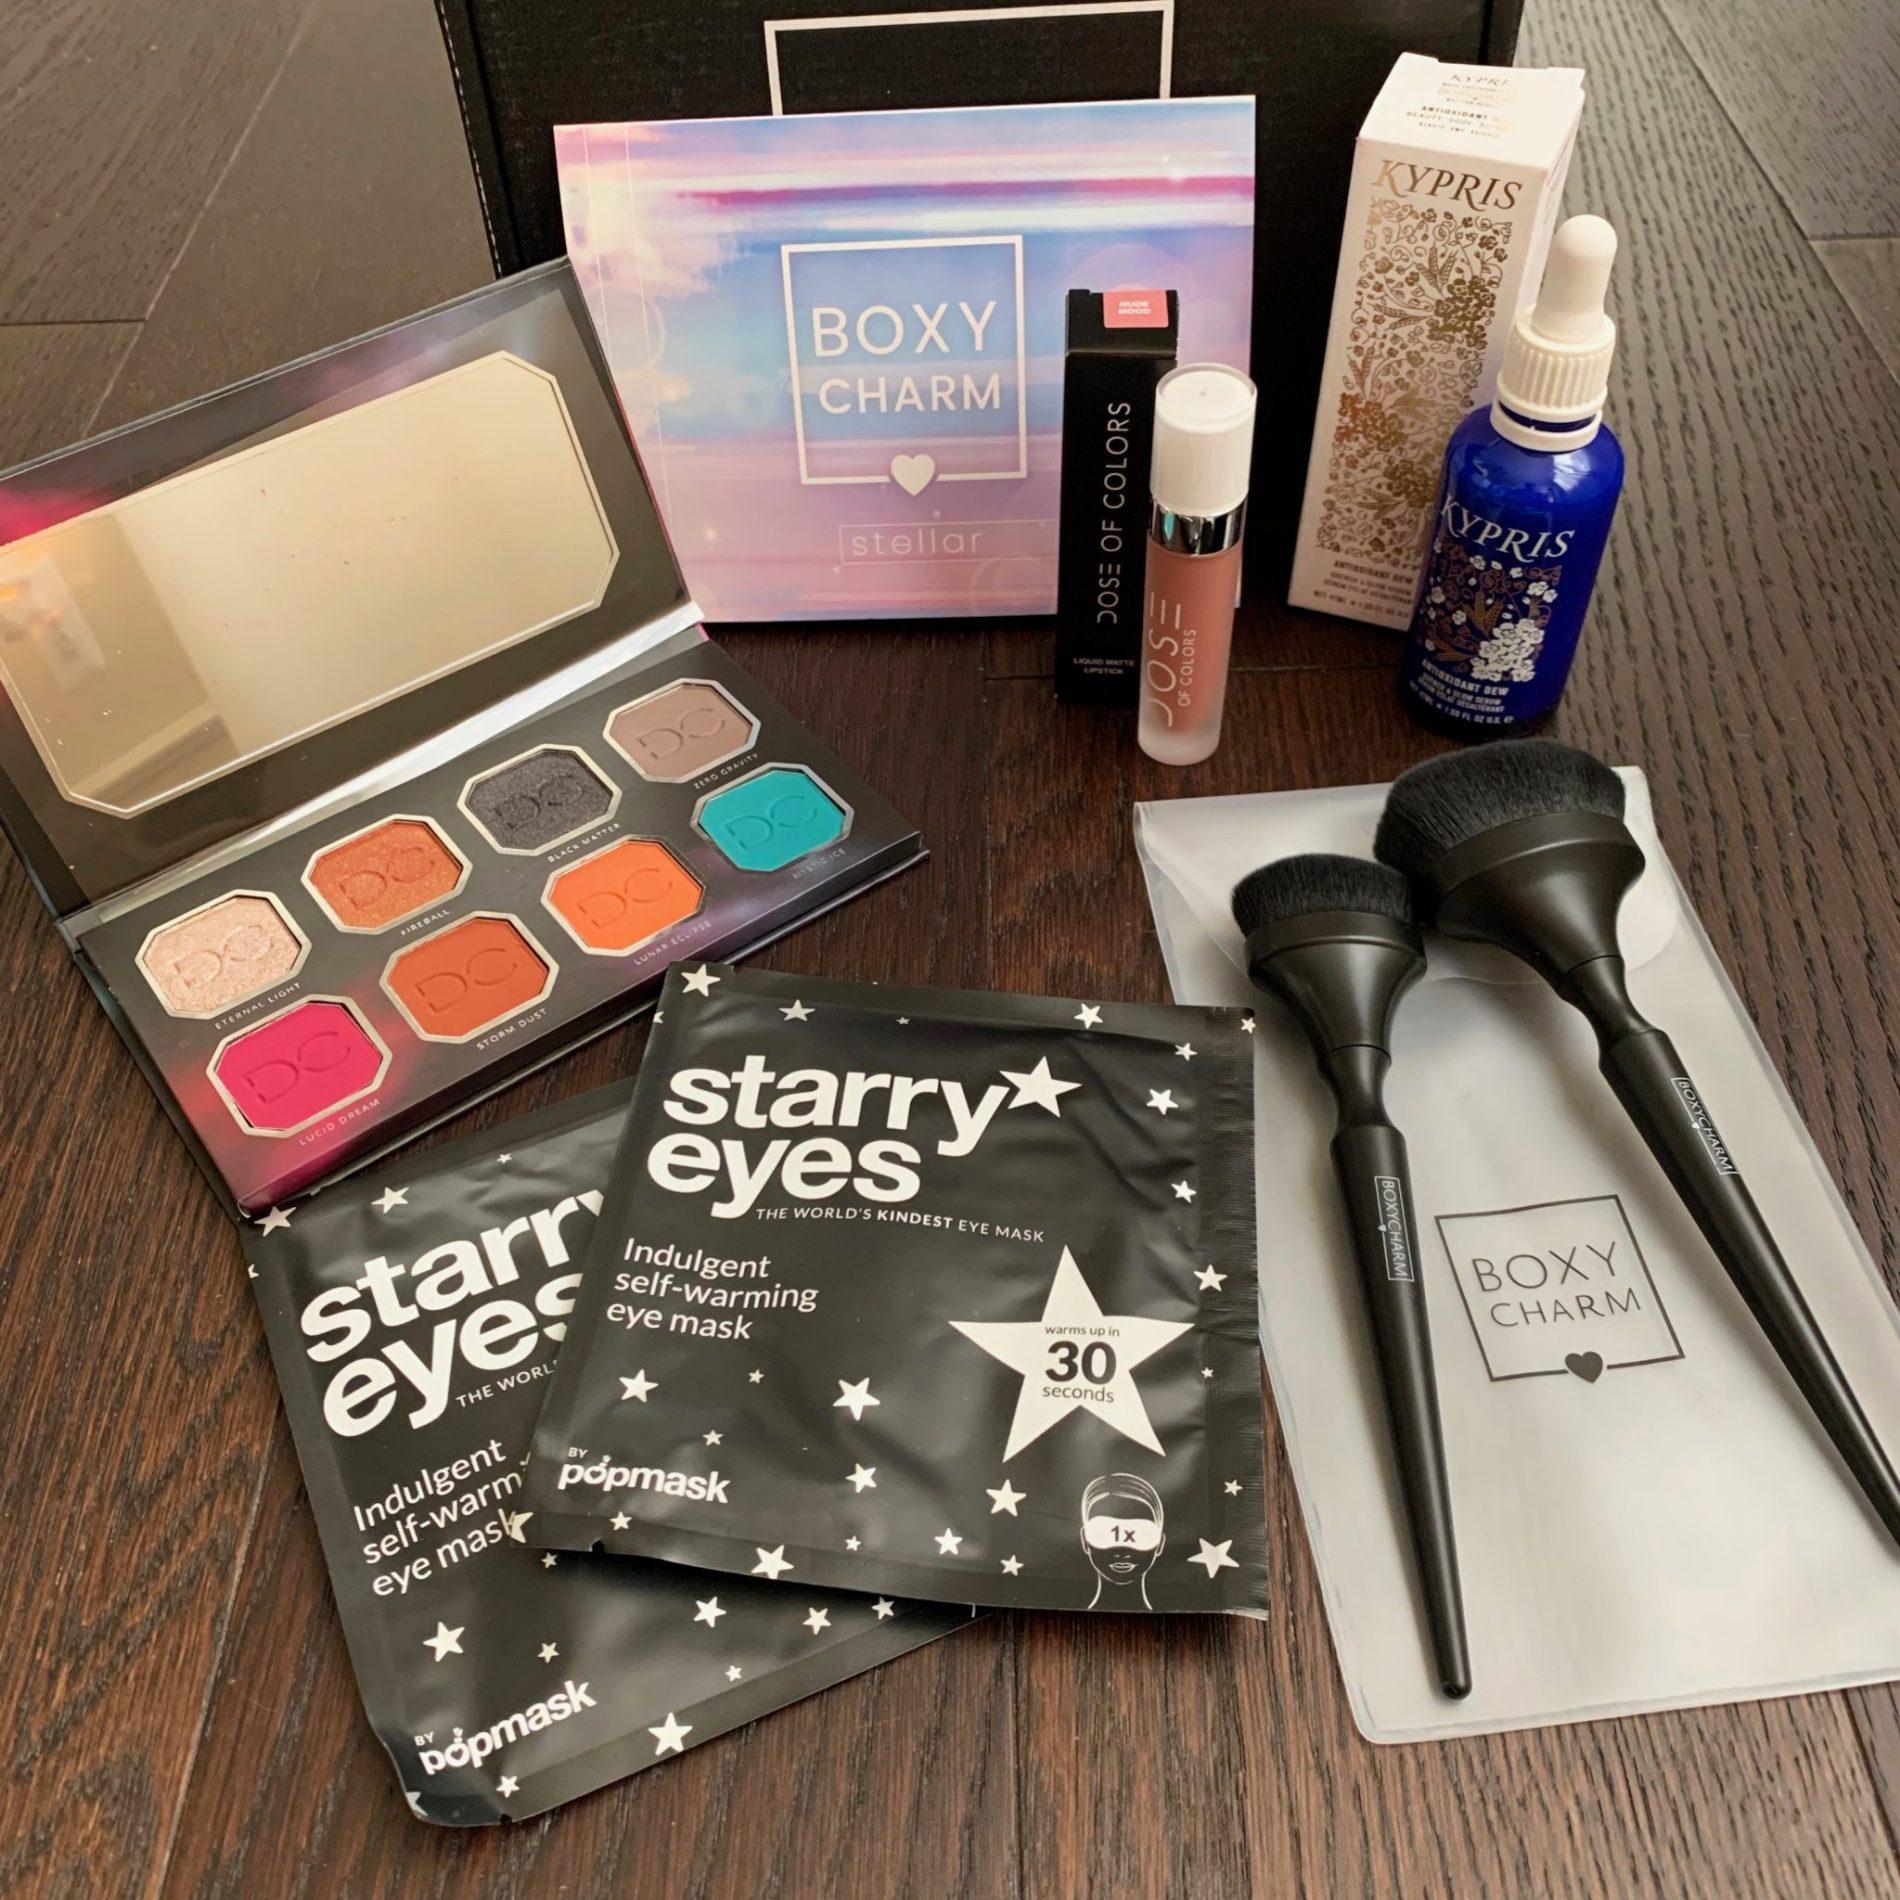 BOXYCHARM Subscription Review – November 2019 + Free Gift Coupon Code